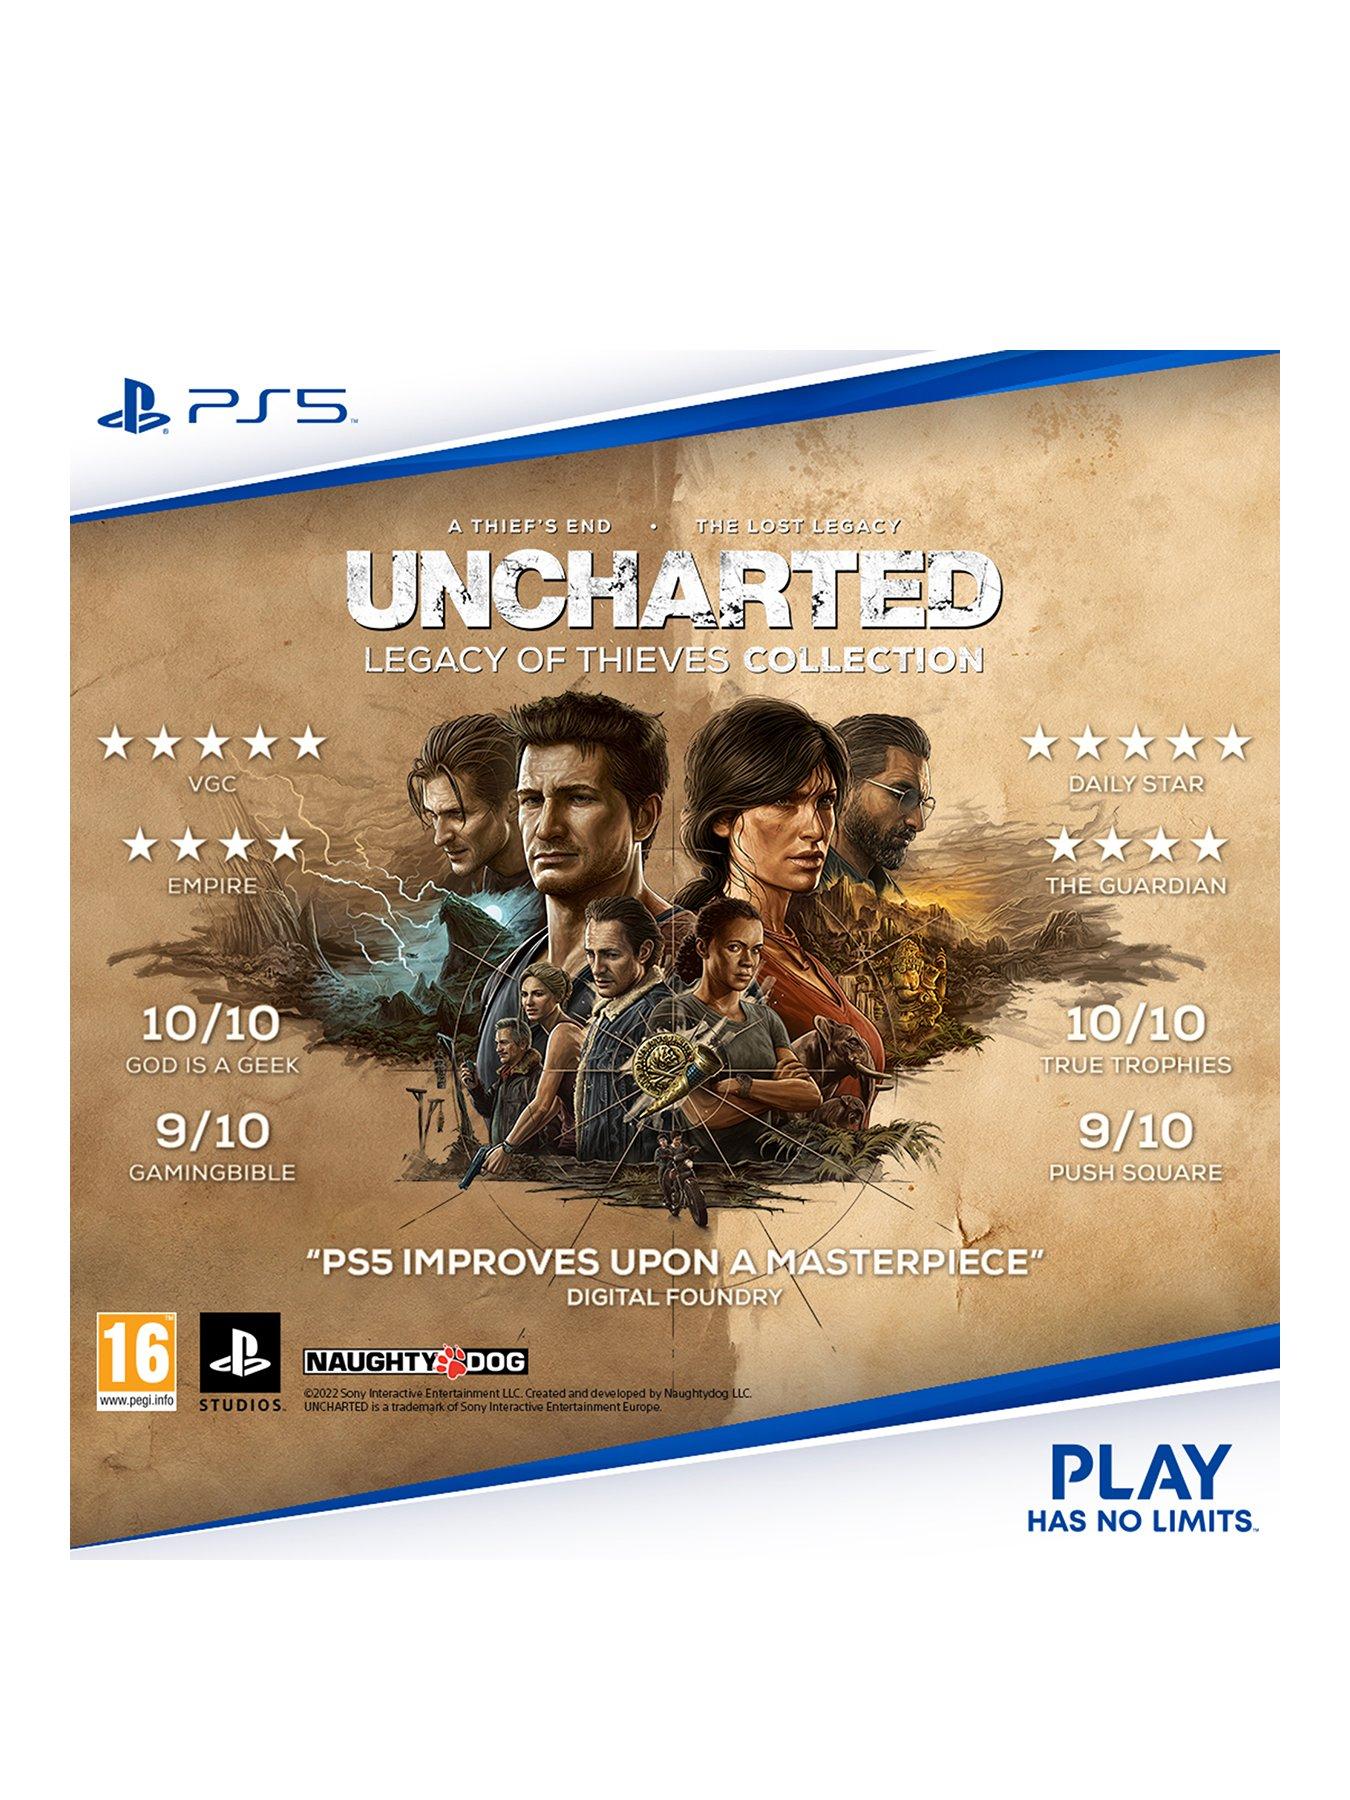 Uncharted: Legacy of Thieves - The PC Version Review - Game on Aus